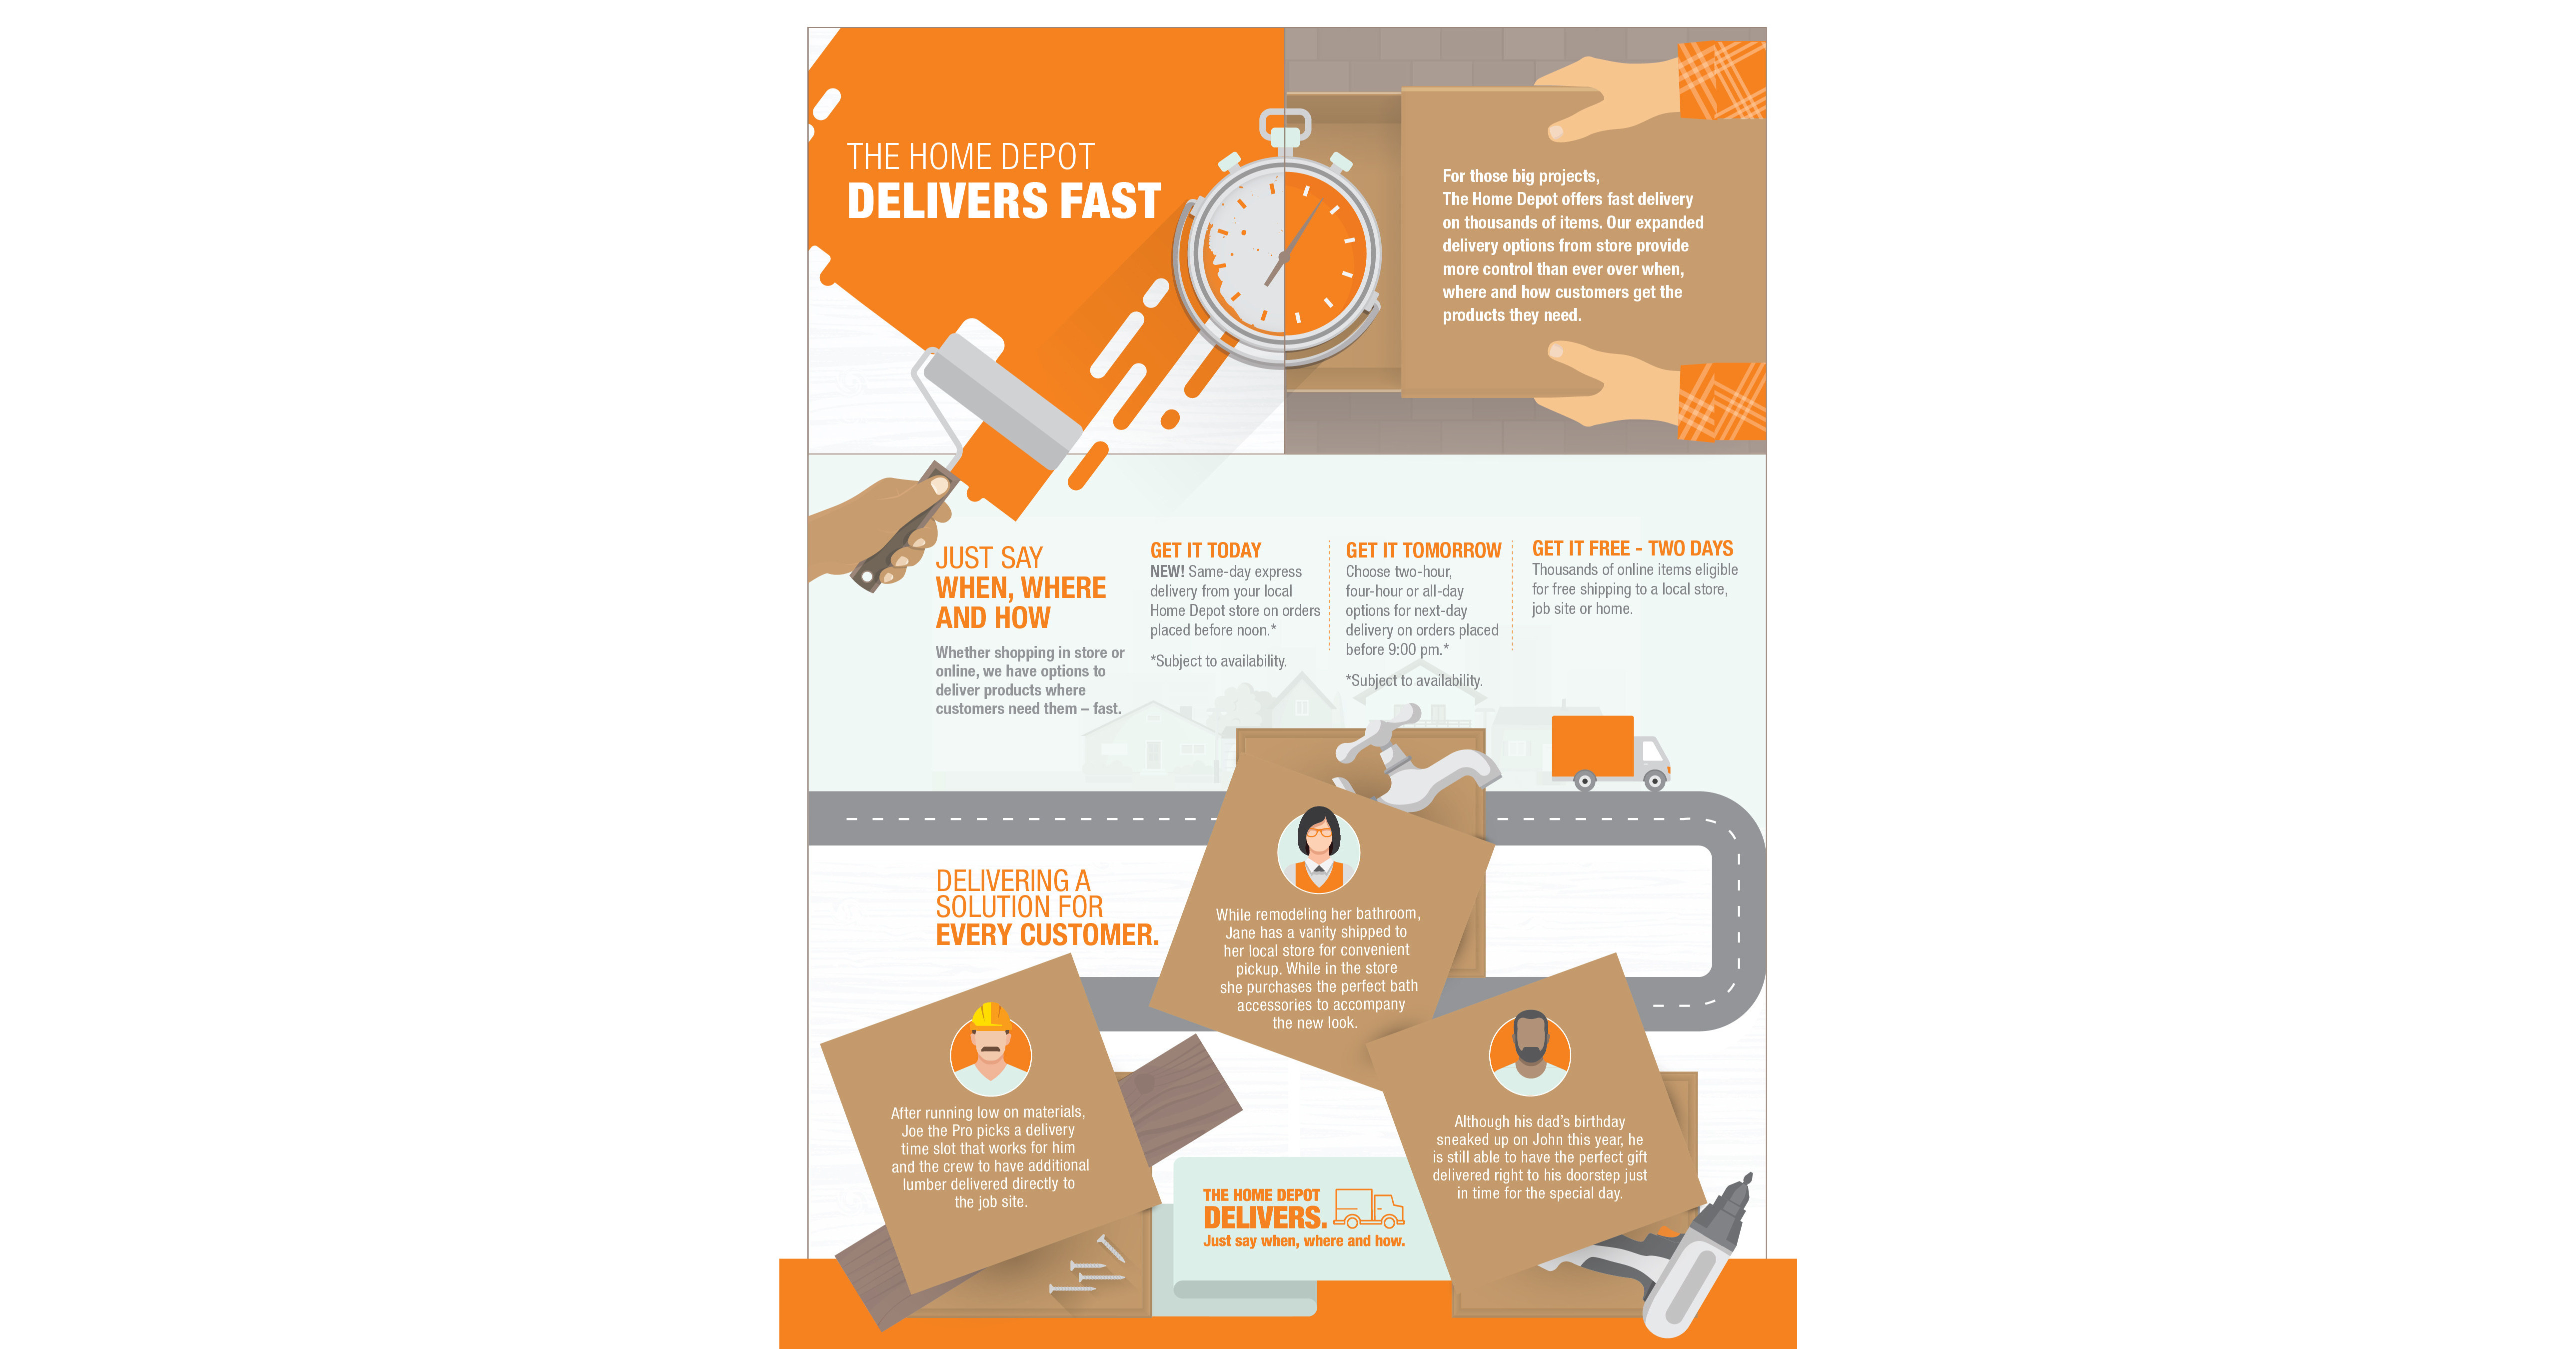 https://mma.prnewswire.com/media/749765/The_Home_Depot_Delivers_Fast_Infographic.jpg?p=facebook